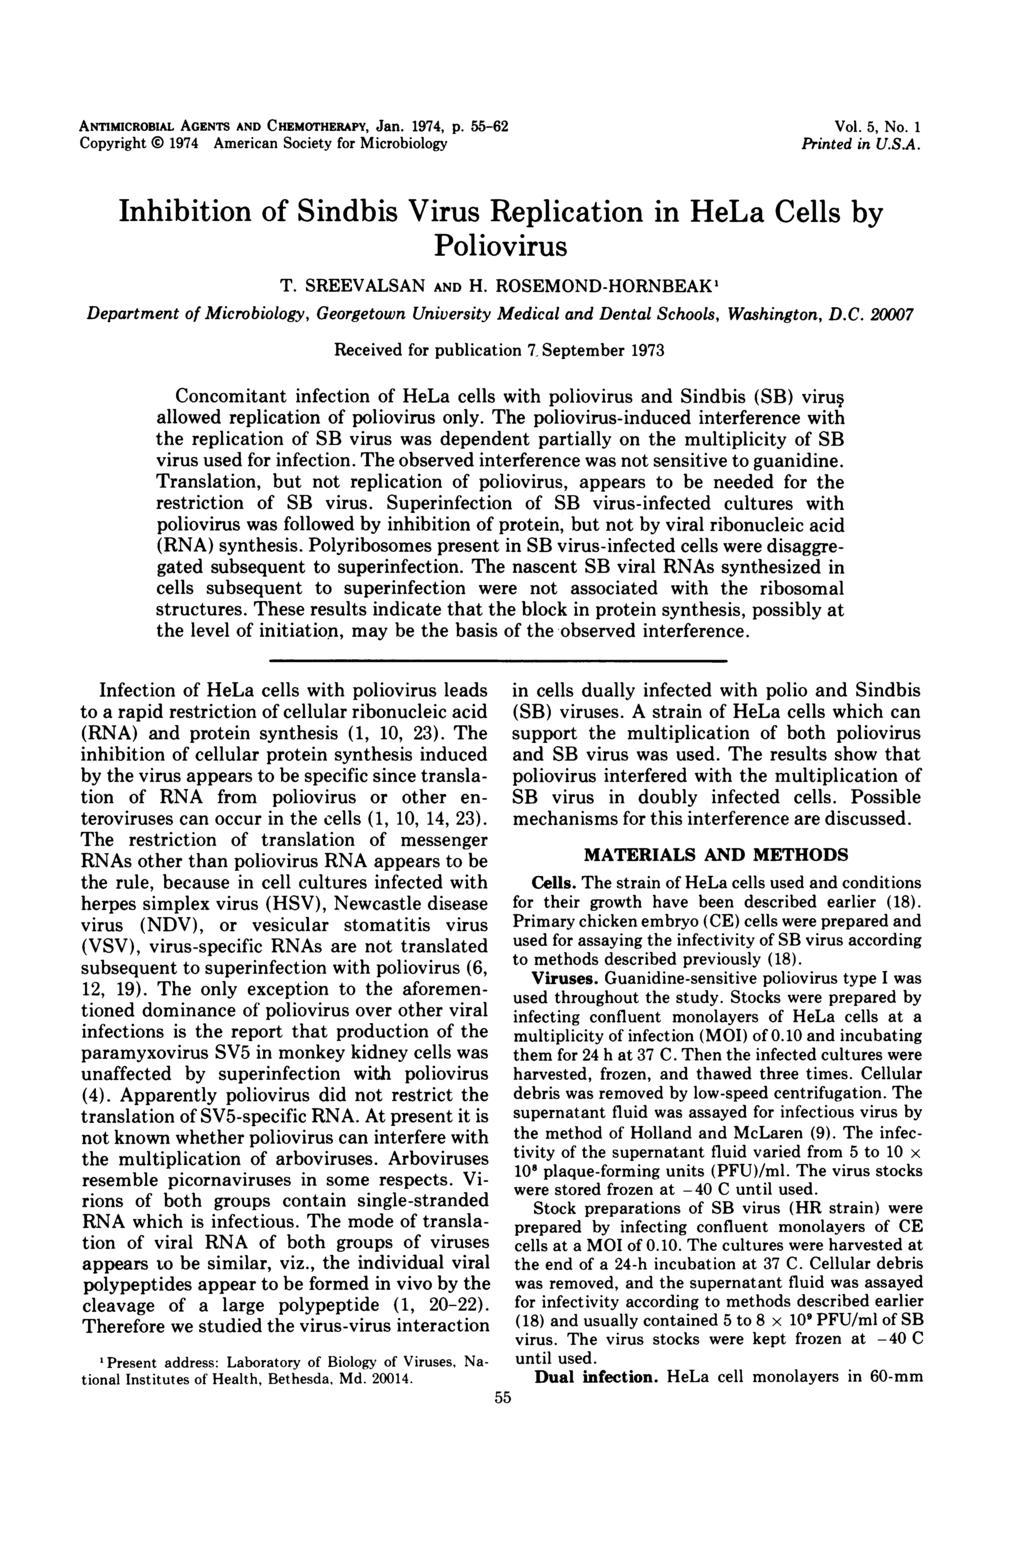 ANTIMICROBIAL AGENTS AND CHEMOrHERAPY, Jan. 1974, p. 55-62 Copyright 0 1974 American Society for Microbiology Vol. 5, No. 1 Printed in U.S.A. Inhibition of Sindbis Virus Replication in HeLa Cells by Poliovirus T.